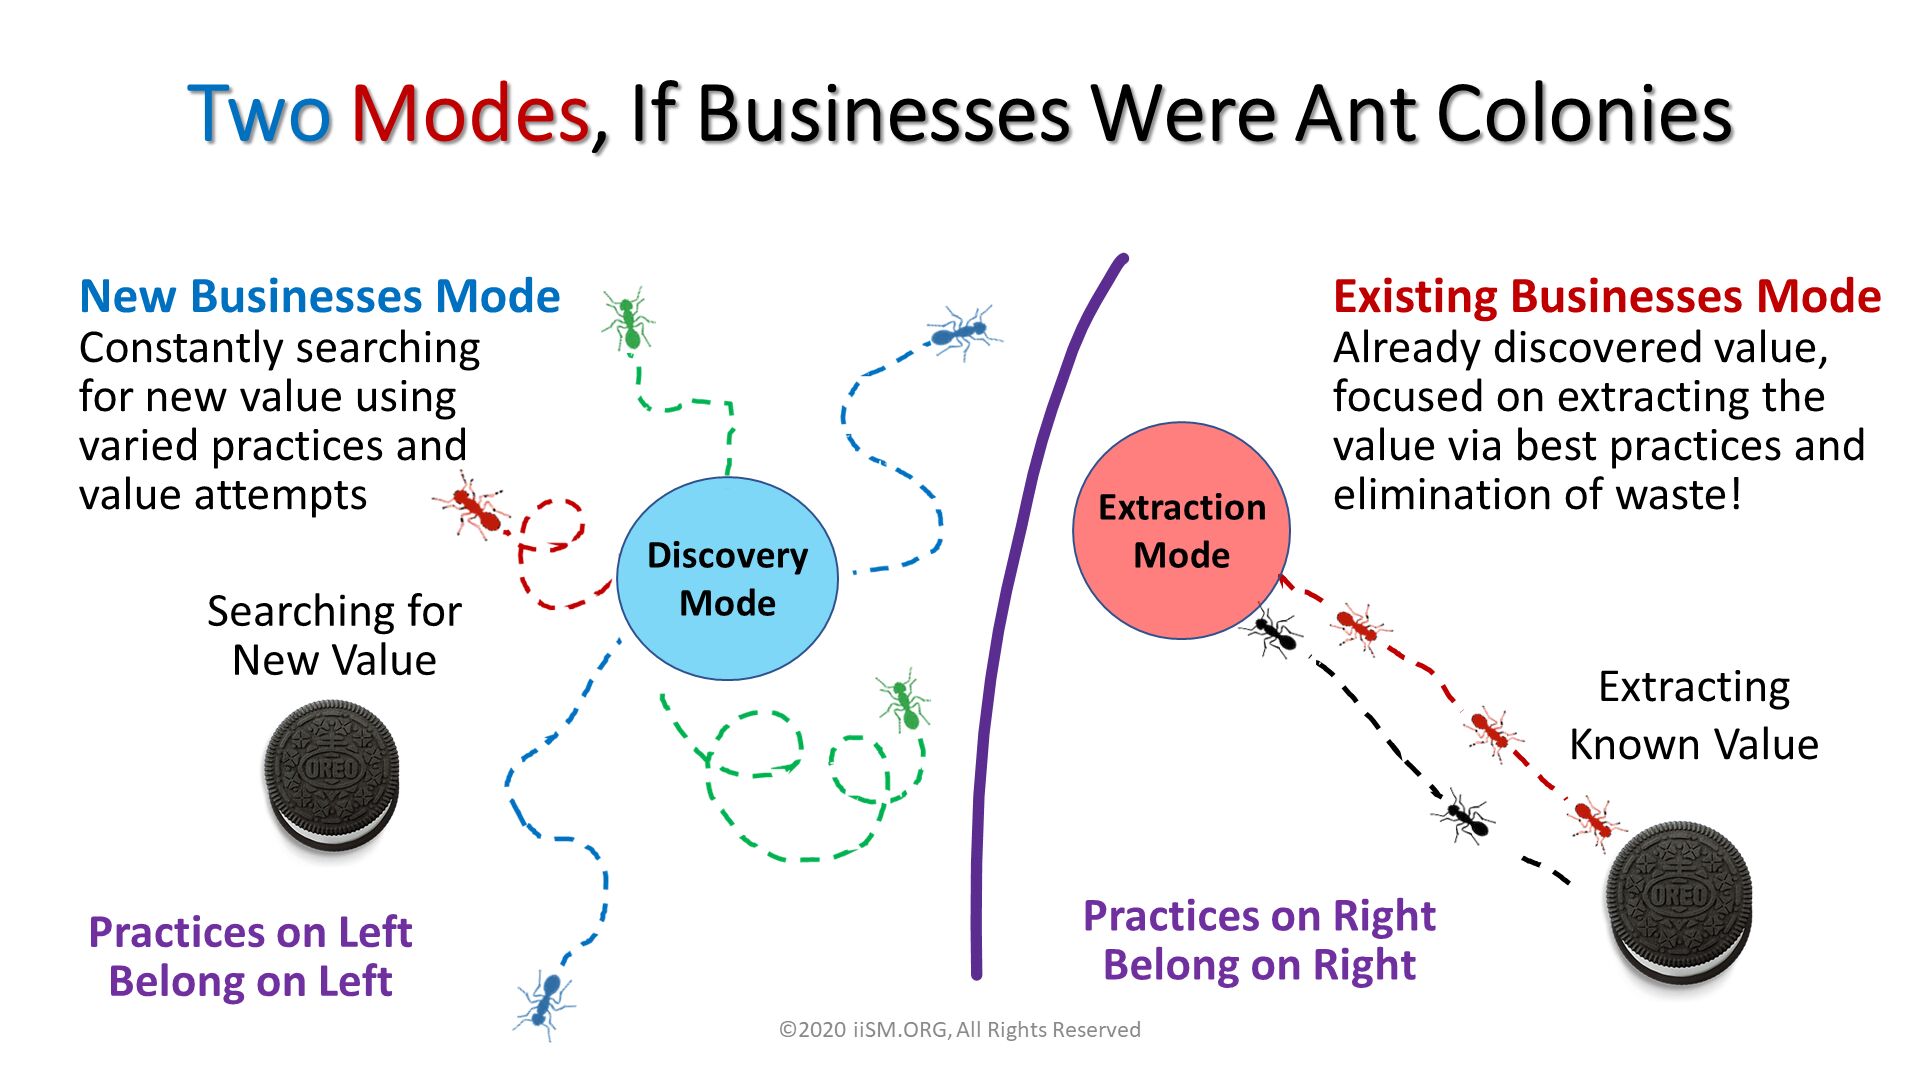 Two Modes, If Businesses Were Ant Colonies. ©2020 iiSM.ORG, All Rights Reserved. Searching forNew Value. Extracting 
Known Value. Existing Businesses Mode
Already discovered value,
focused on extracting the value via best practices and elimination of waste!. New Businesses Mode
Constantly searching
for new value using varied practices and value attempts. ExtractionMode. DiscoveryMode. Practices on Left Belong on Left. Practices on Right Belong on Right. 